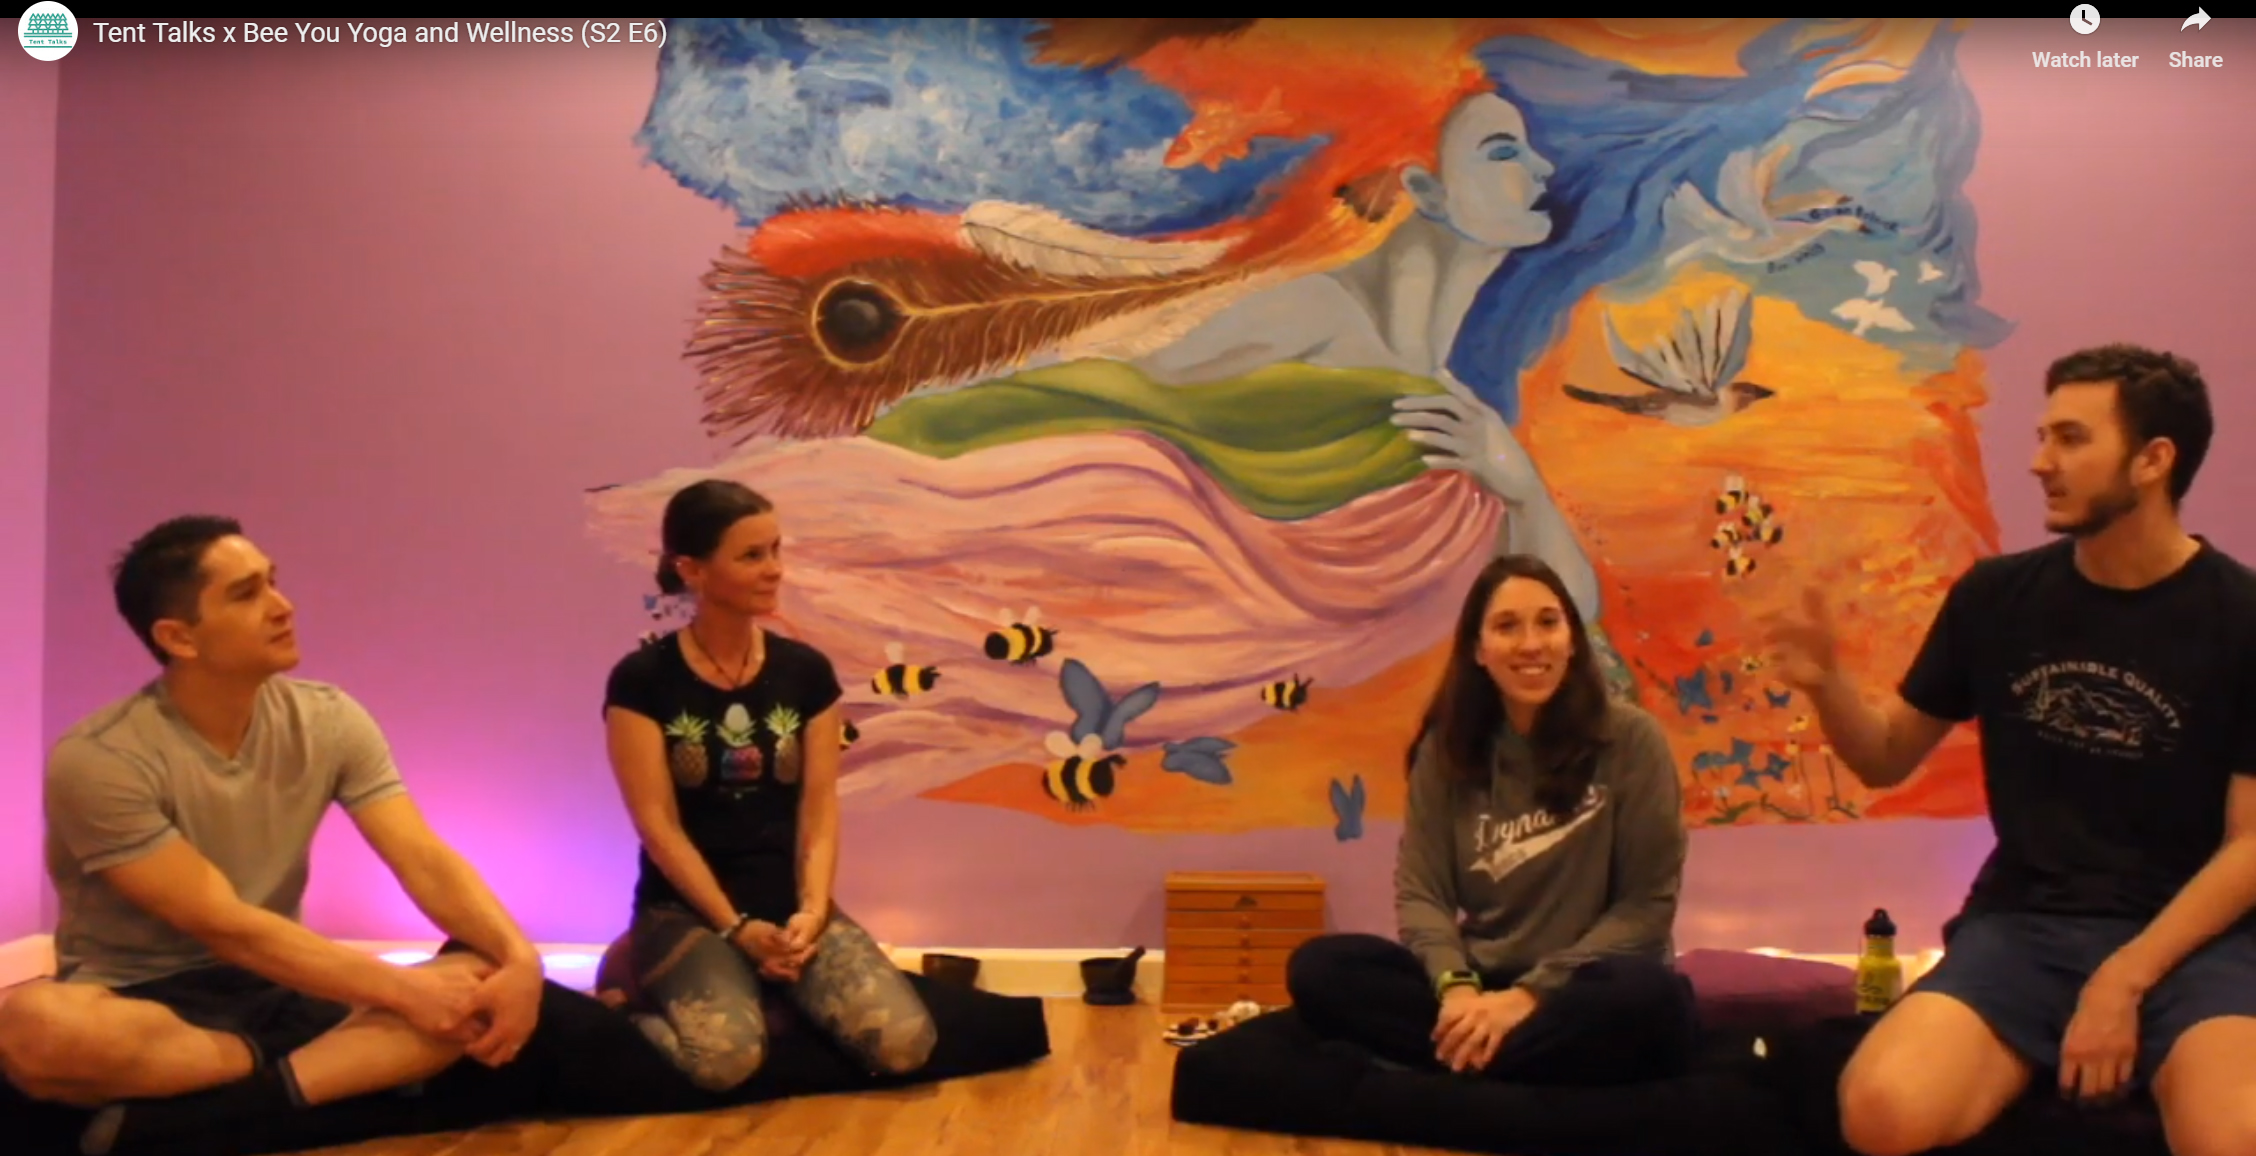 Bee You Yoga and Wellness - Yoga Therapy, Yoga, Yoga for anxiety, Yoga for depression, Yoga for recovery, y12sr, donation based yoga & meditation for everyone, kids yoga, BARRE, Sadie Nardini Yoga Shred Fusion, Full body conditioning, Yoga Nidra, Swedish massage, myofascial release, PSYCH-K, Reiki, BARRE, ZUMBA, Yoga Shred, Bee You Yoga, Yoga 07885, Yoga 07869, Randolph, Roxbury, Mine Hill, New Jersey, North Jersey, Morris County, Yoga Morris County, Buti Yoga